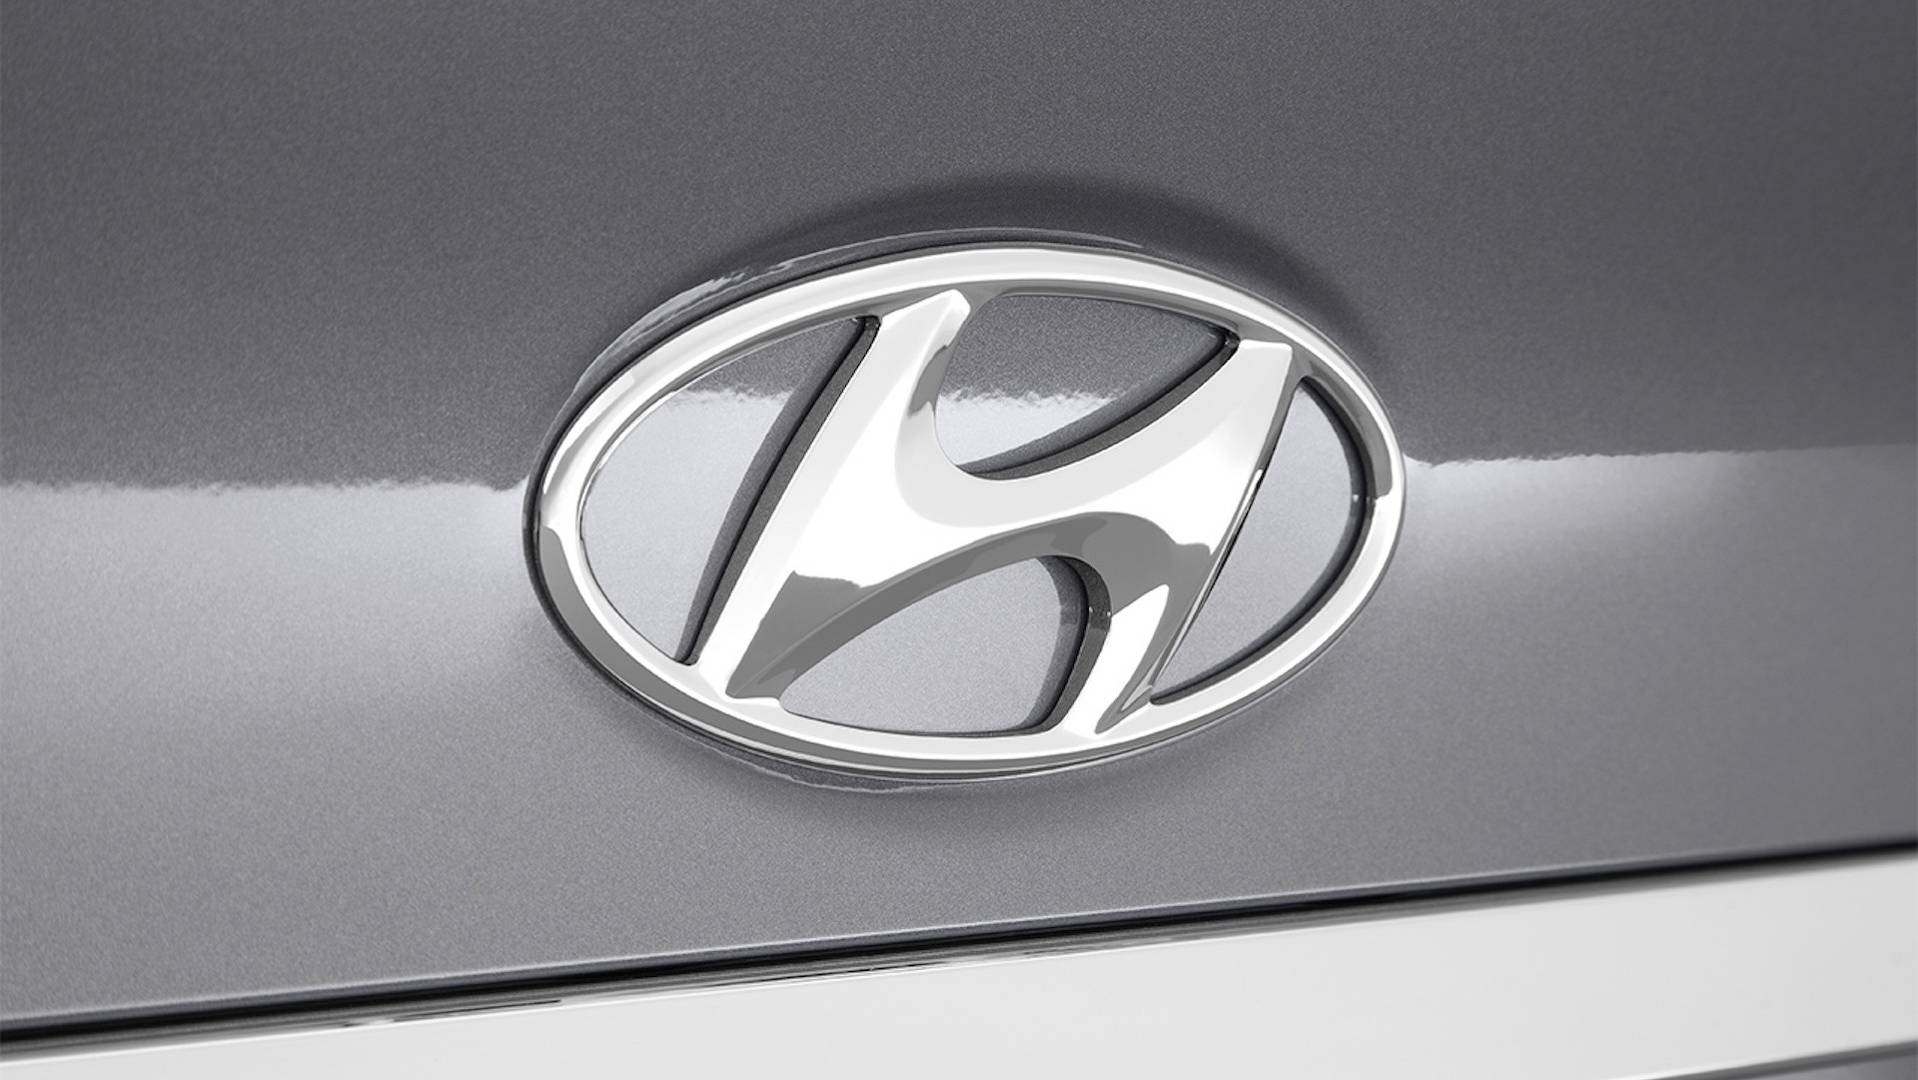 Hyundai Logo - Can't Unsee: Hyundai Logo Is Actually Two People Shaking Hands